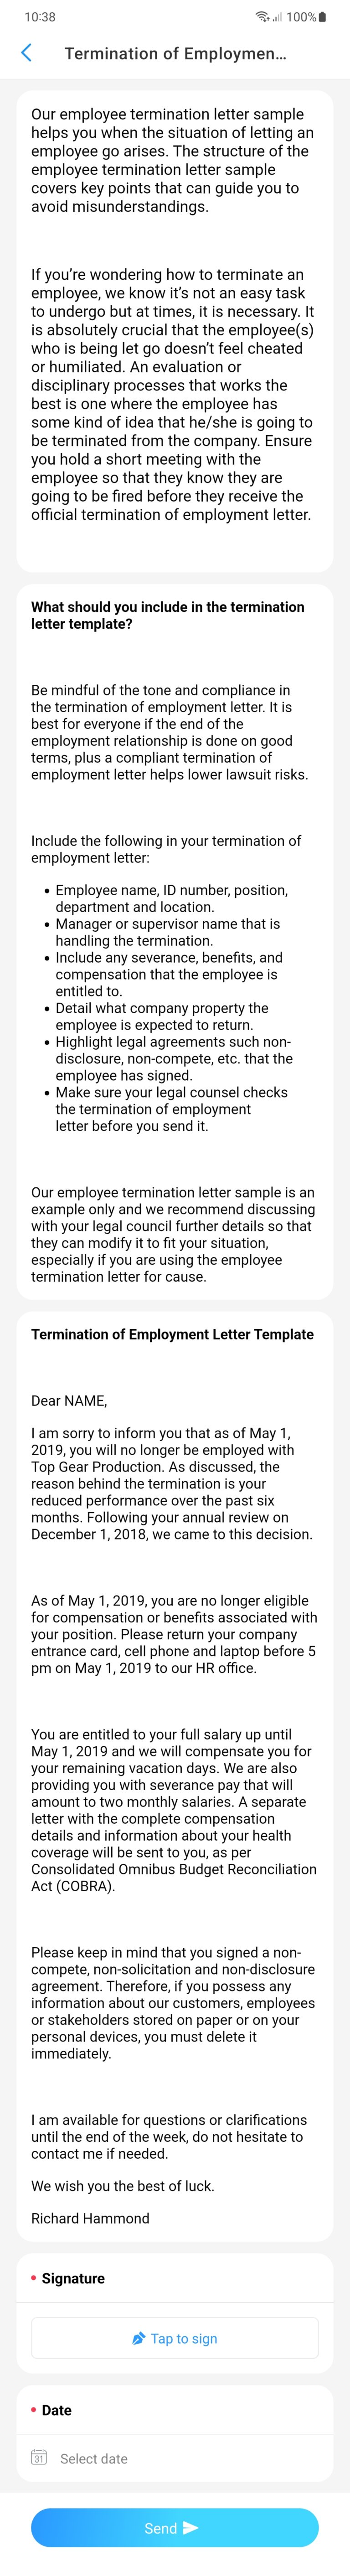 Employee termination letter - mobile view